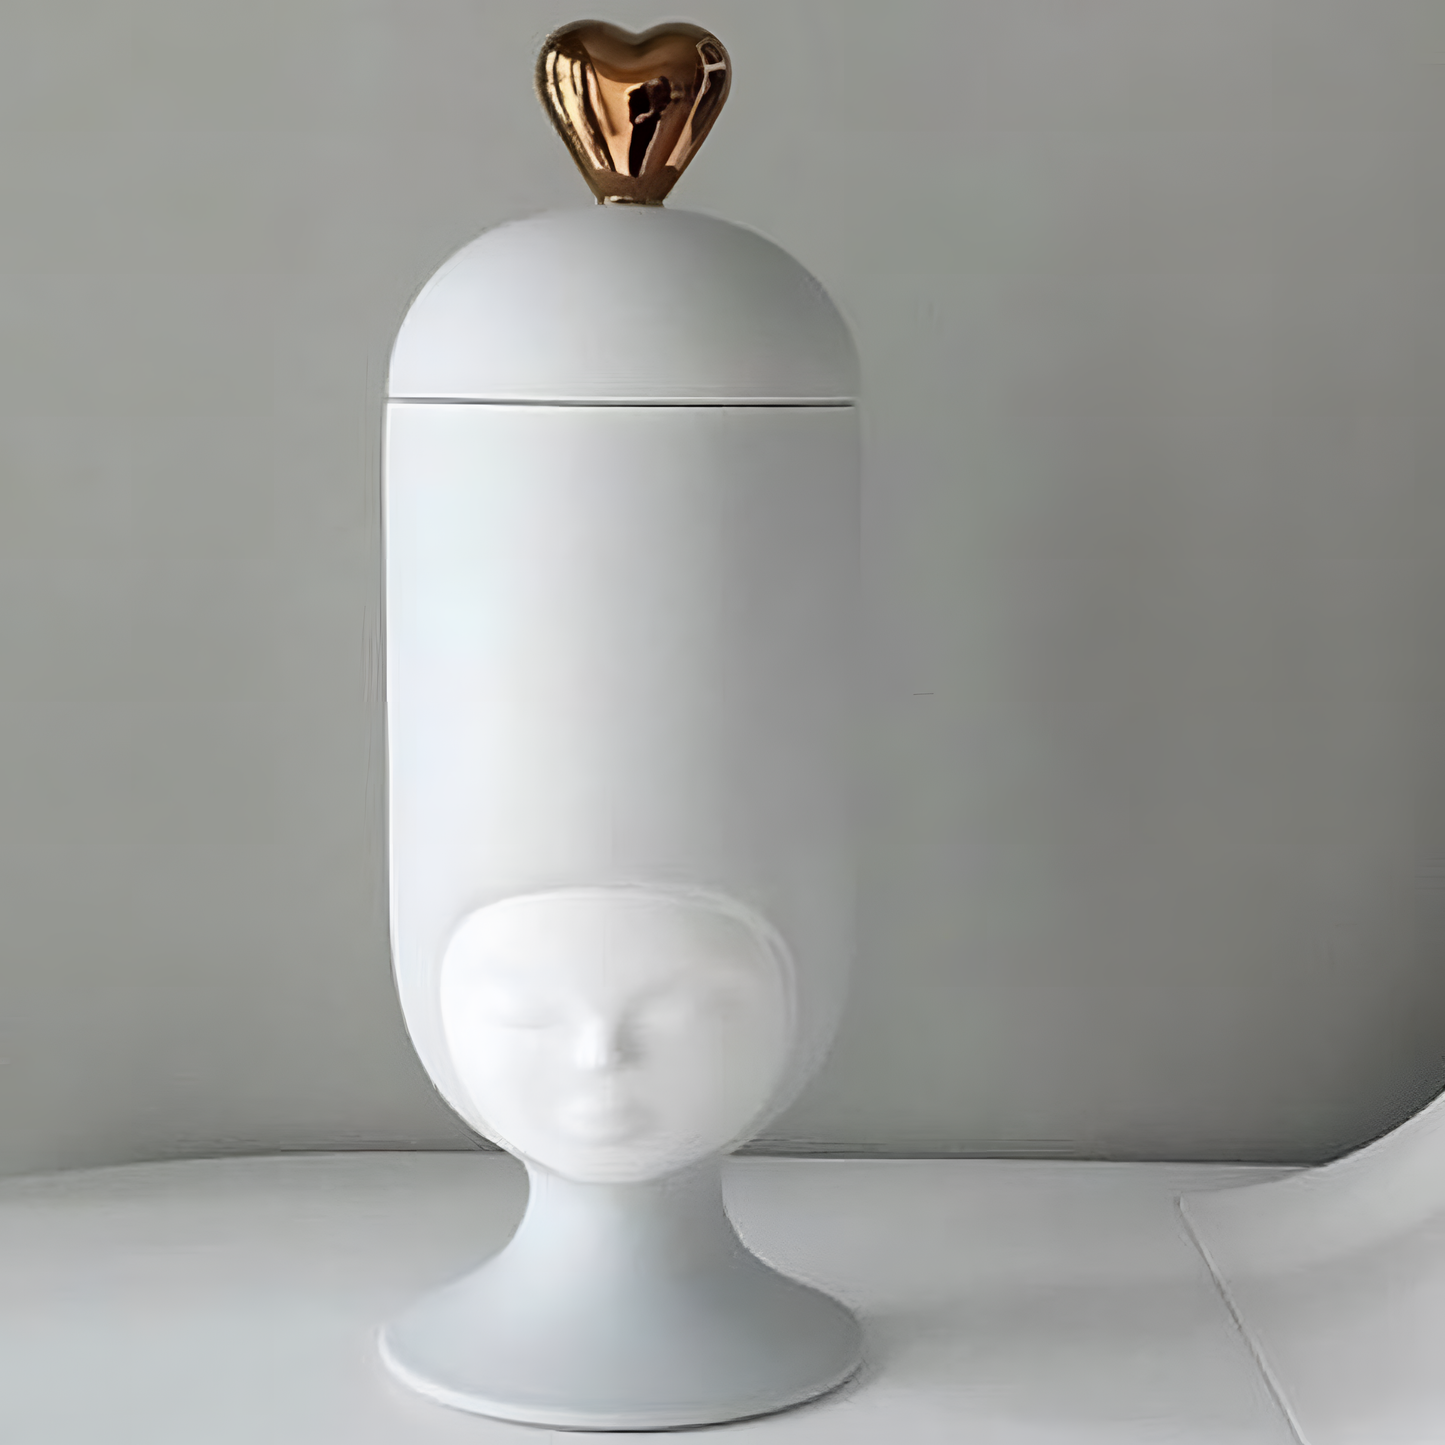 Sister Clara Vase in Satin White with a Glossy Gold Heart